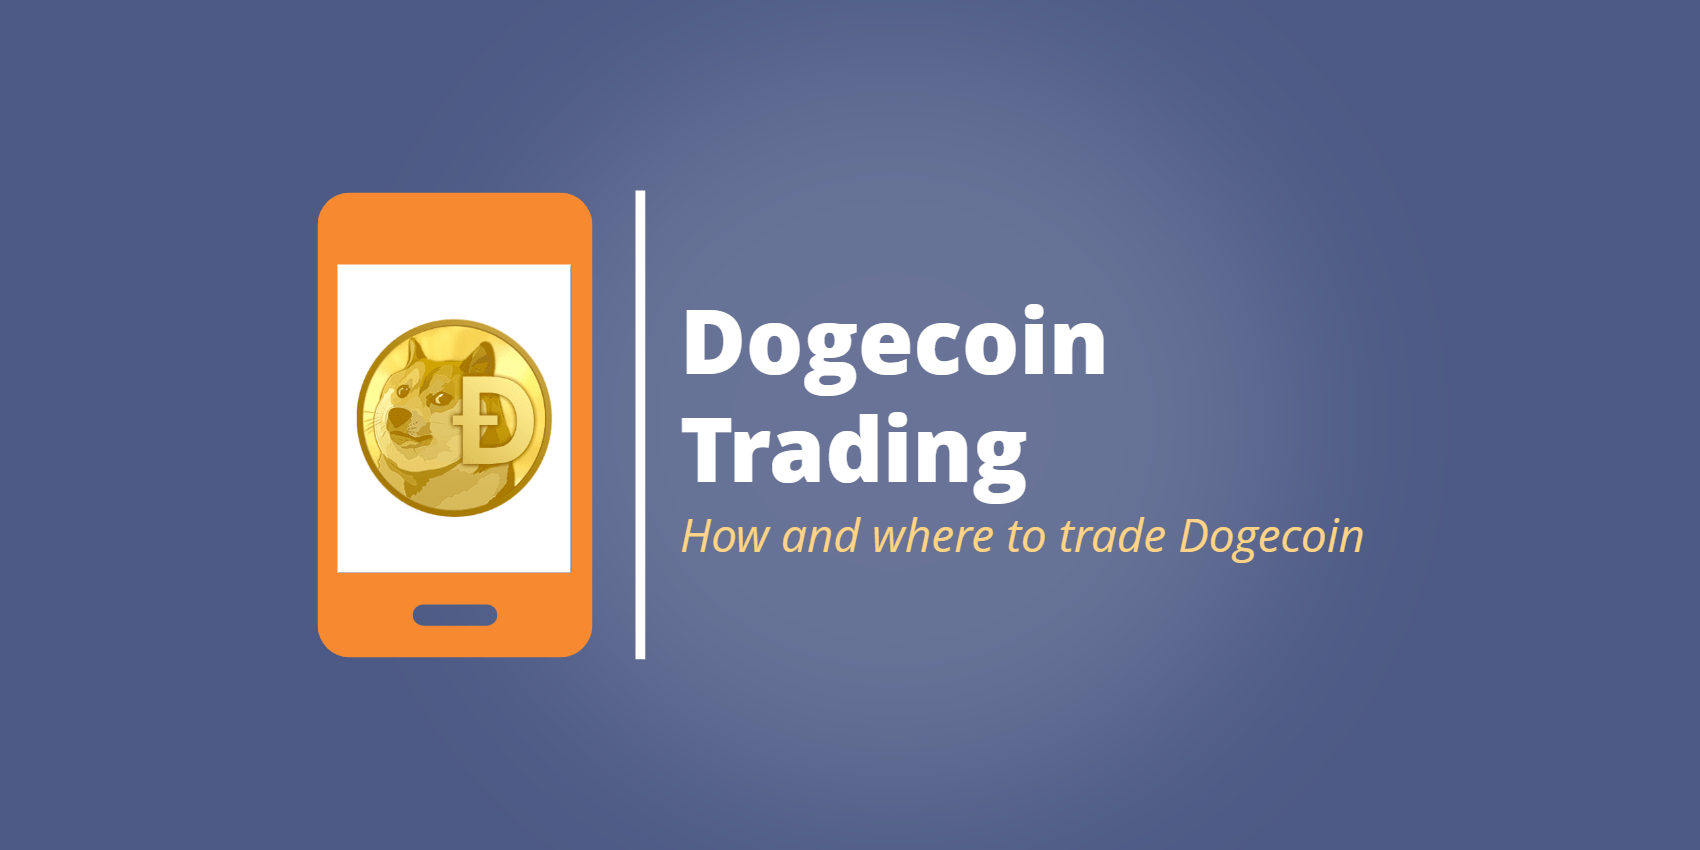 Dogecoin Trading in 2022: How to Get a Doge 🐕 in Your Pocket - Commodity.com